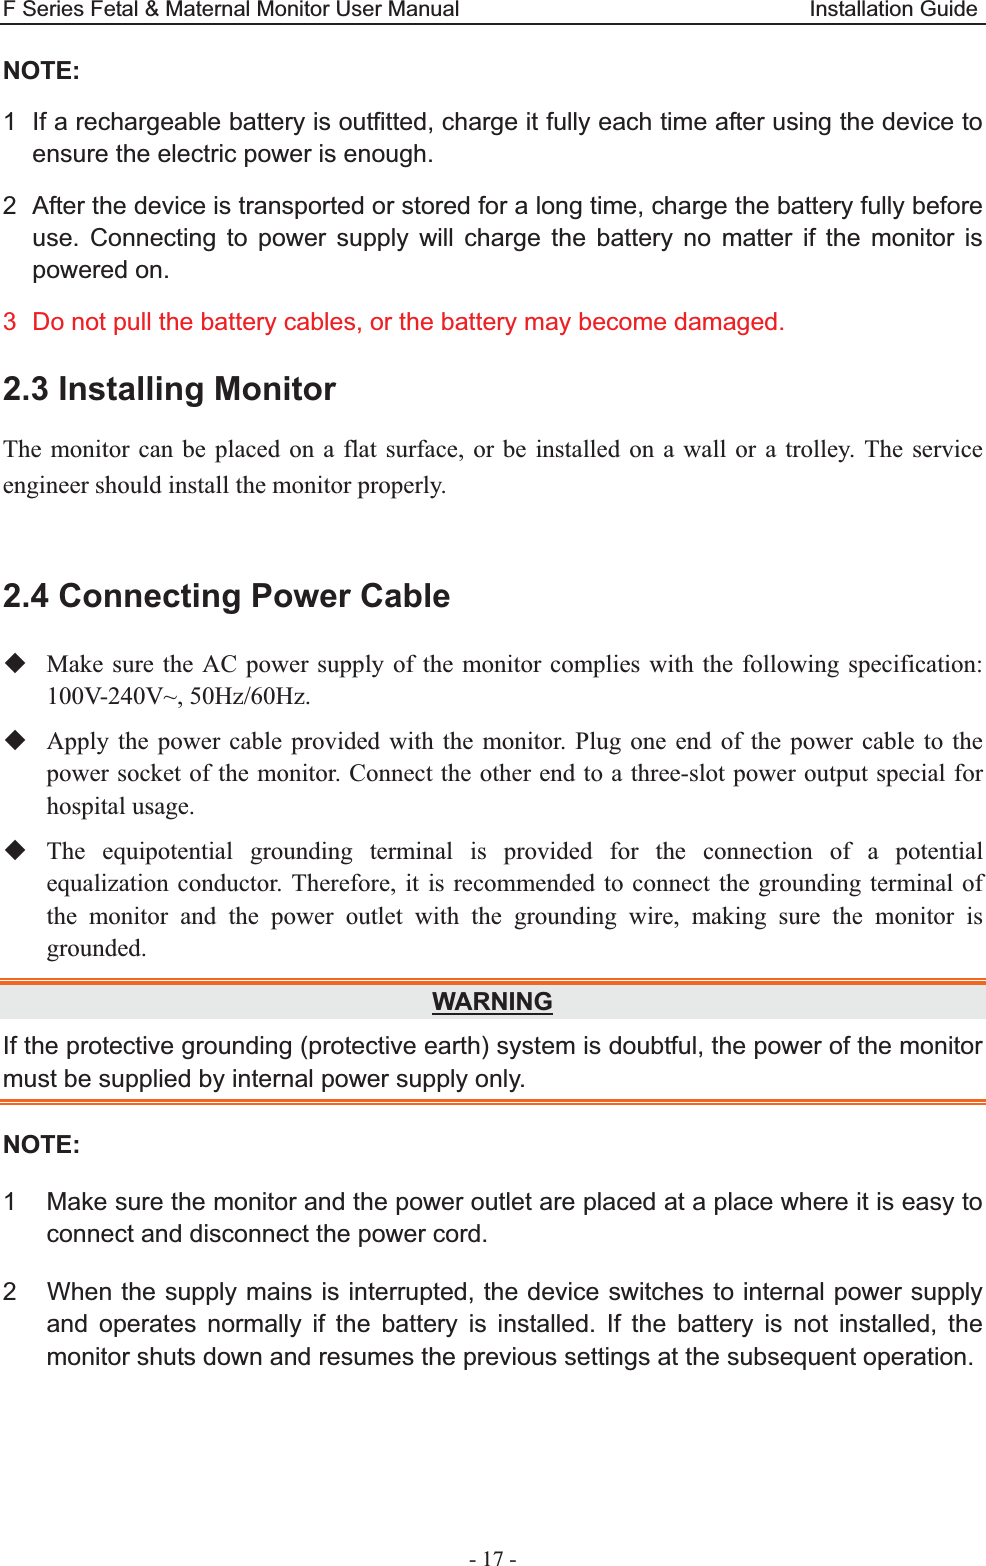 F Series Fetal &amp; Maternal Monitor User Manual                                Installation Guide - 17 - NOTE: 1  If a rechargeable battery is outfitted, charge it fully each time after using the device to ensure the electric power is enough. 2  After the device is transported or stored for a long time, charge the battery fully before use. Connecting to power supply will charge the battery no matter if the monitor is powered on. 3  Do not pull the battery cables, or the battery may become damaged. 2.3 Installing Monitor The monitor can be placed on a flat surface, or be installed on a wall or a trolley. The service engineer should install the monitor properly.  2.4 Connecting Power Cable  Make sure the AC power supply of the monitor complies with the following specification: 100V-240V~, 50Hz/60Hz.  Apply the power cable provided with the monitor. Plug one end of the power cable to the power socket of the monitor. Connect the other end to a three-slot power output special for hospital usage.  The equipotential grounding terminal is provided for the connection of a potential equalization conductor. Therefore, it is recommended to connect the grounding terminal of the monitor and the power outlet with the grounding wire, making sure the monitor is grounded. WARNINGIf the protective grounding (protective earth) system is doubtful, the power of the monitor must be supplied by internal power supply only. NOTE:1  Make sure the monitor and the power outlet are placed at a place where it is easy to connect and disconnect the power cord.2  When the supply mains is interrupted, the device switches to internal power supply and operates normally if the battery is installed. If the battery is not installed, the monitor shuts down and resumes the previous settings at the subsequent operation.